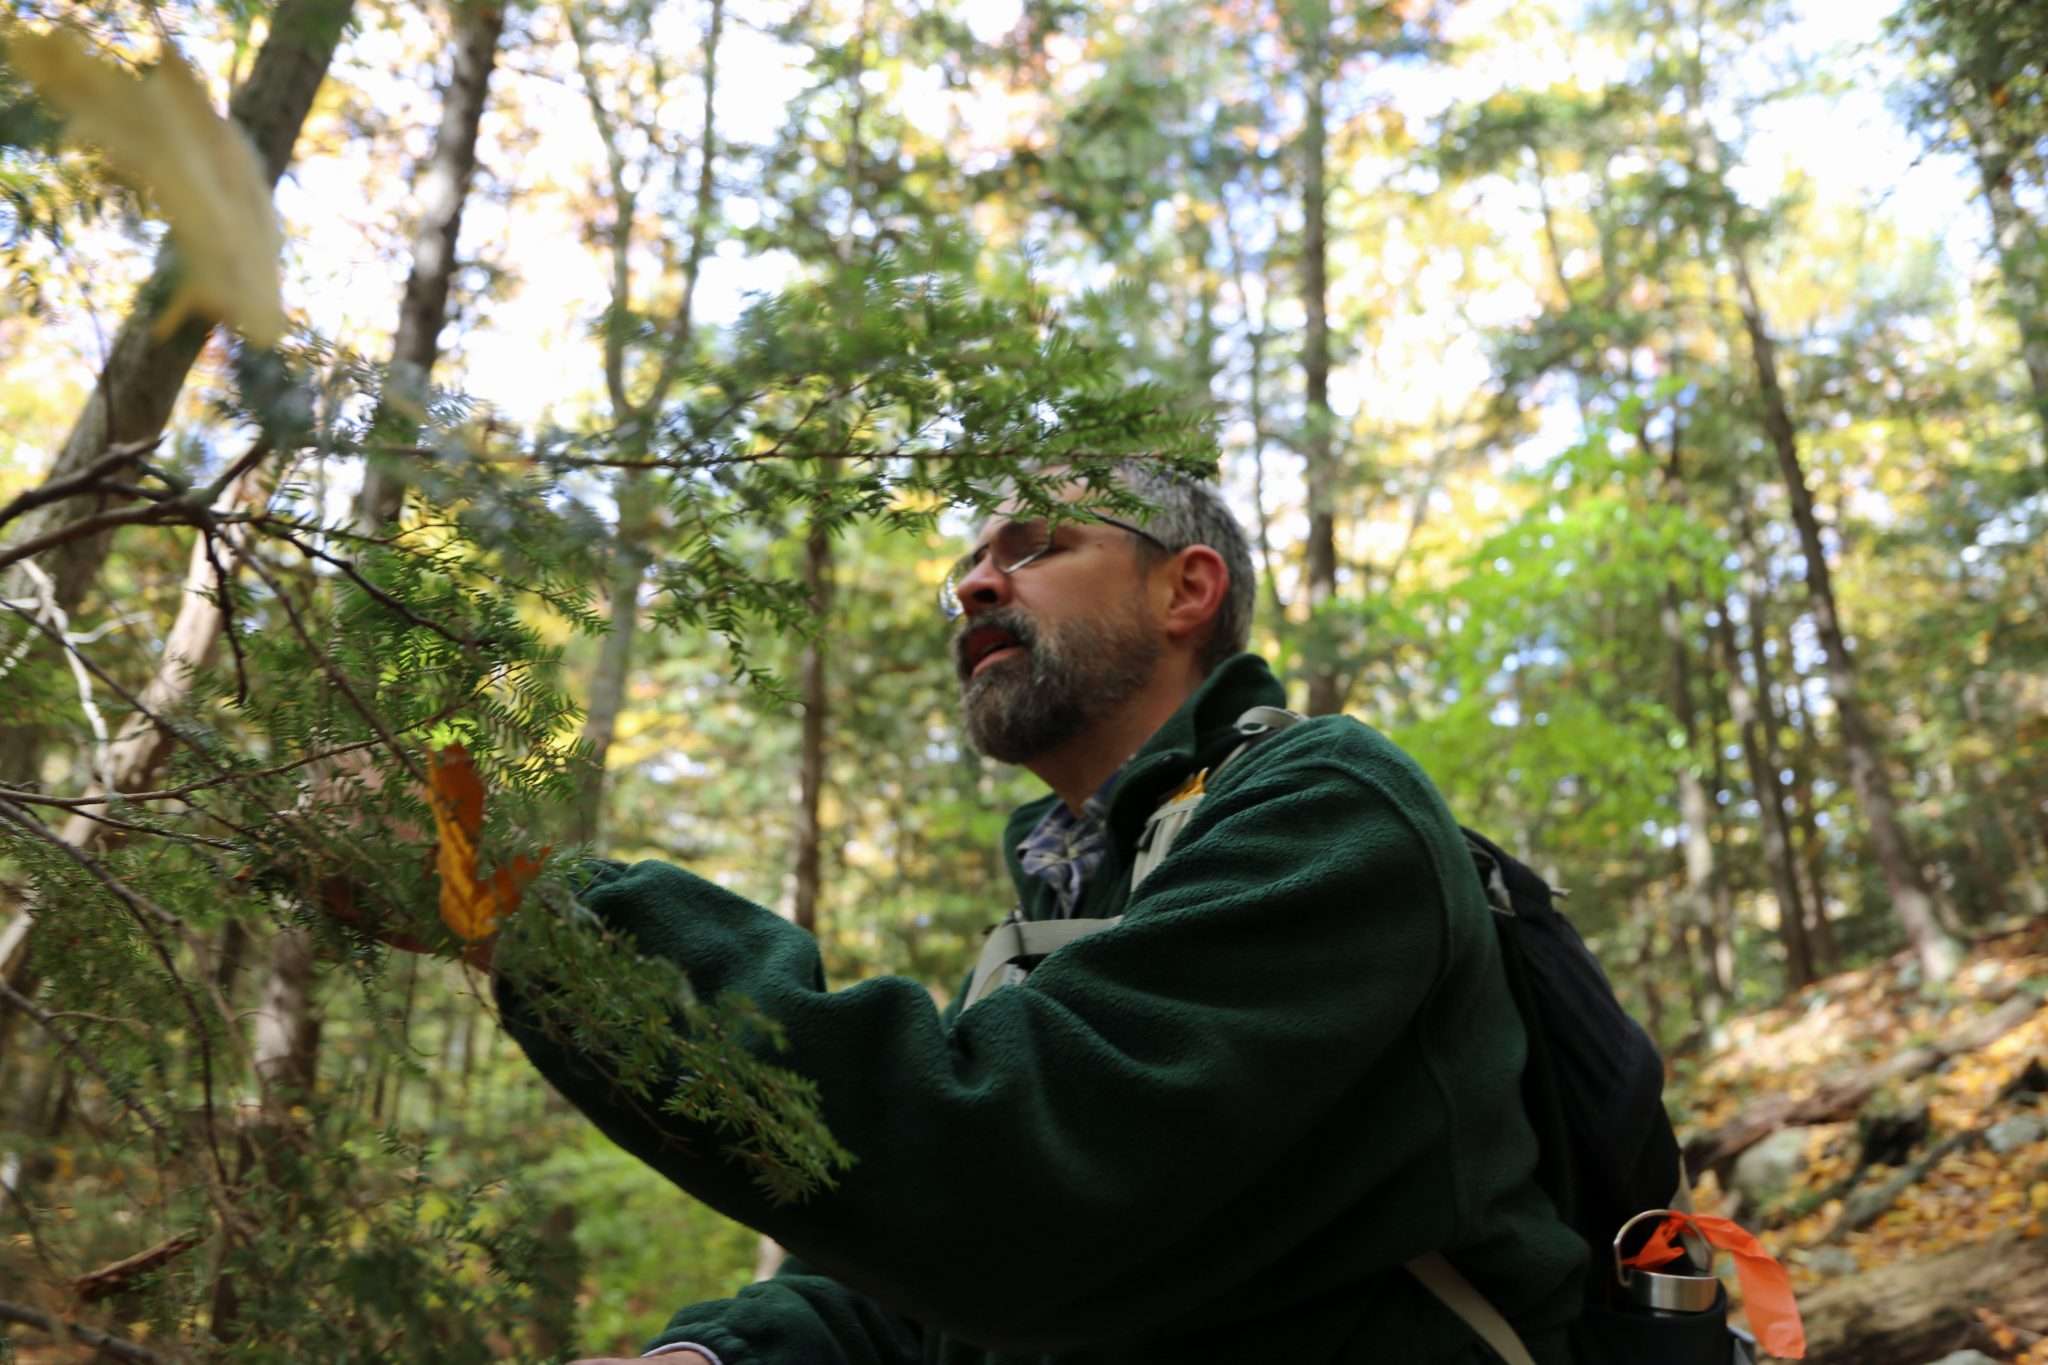 Jason Denham, forester with the state Department of Environmental Conservation, inspects a hemlock tree for hemlock woolly adelgid on Oct. 20, 2022 in Washington County on Lake George. Photo by Gwendolyn Craig